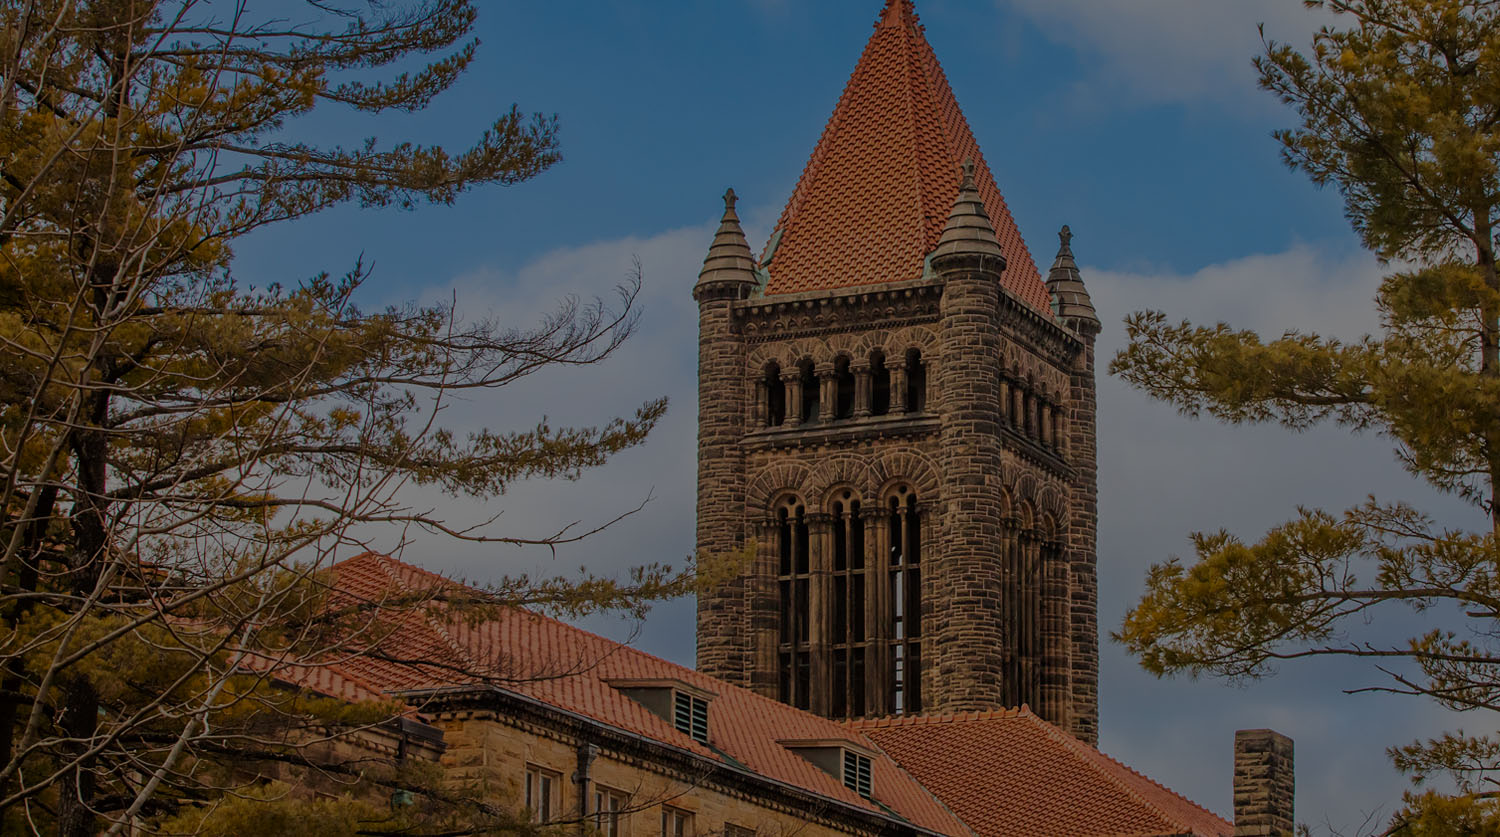 Altgeld Hall in the winter months with a bright blue sky